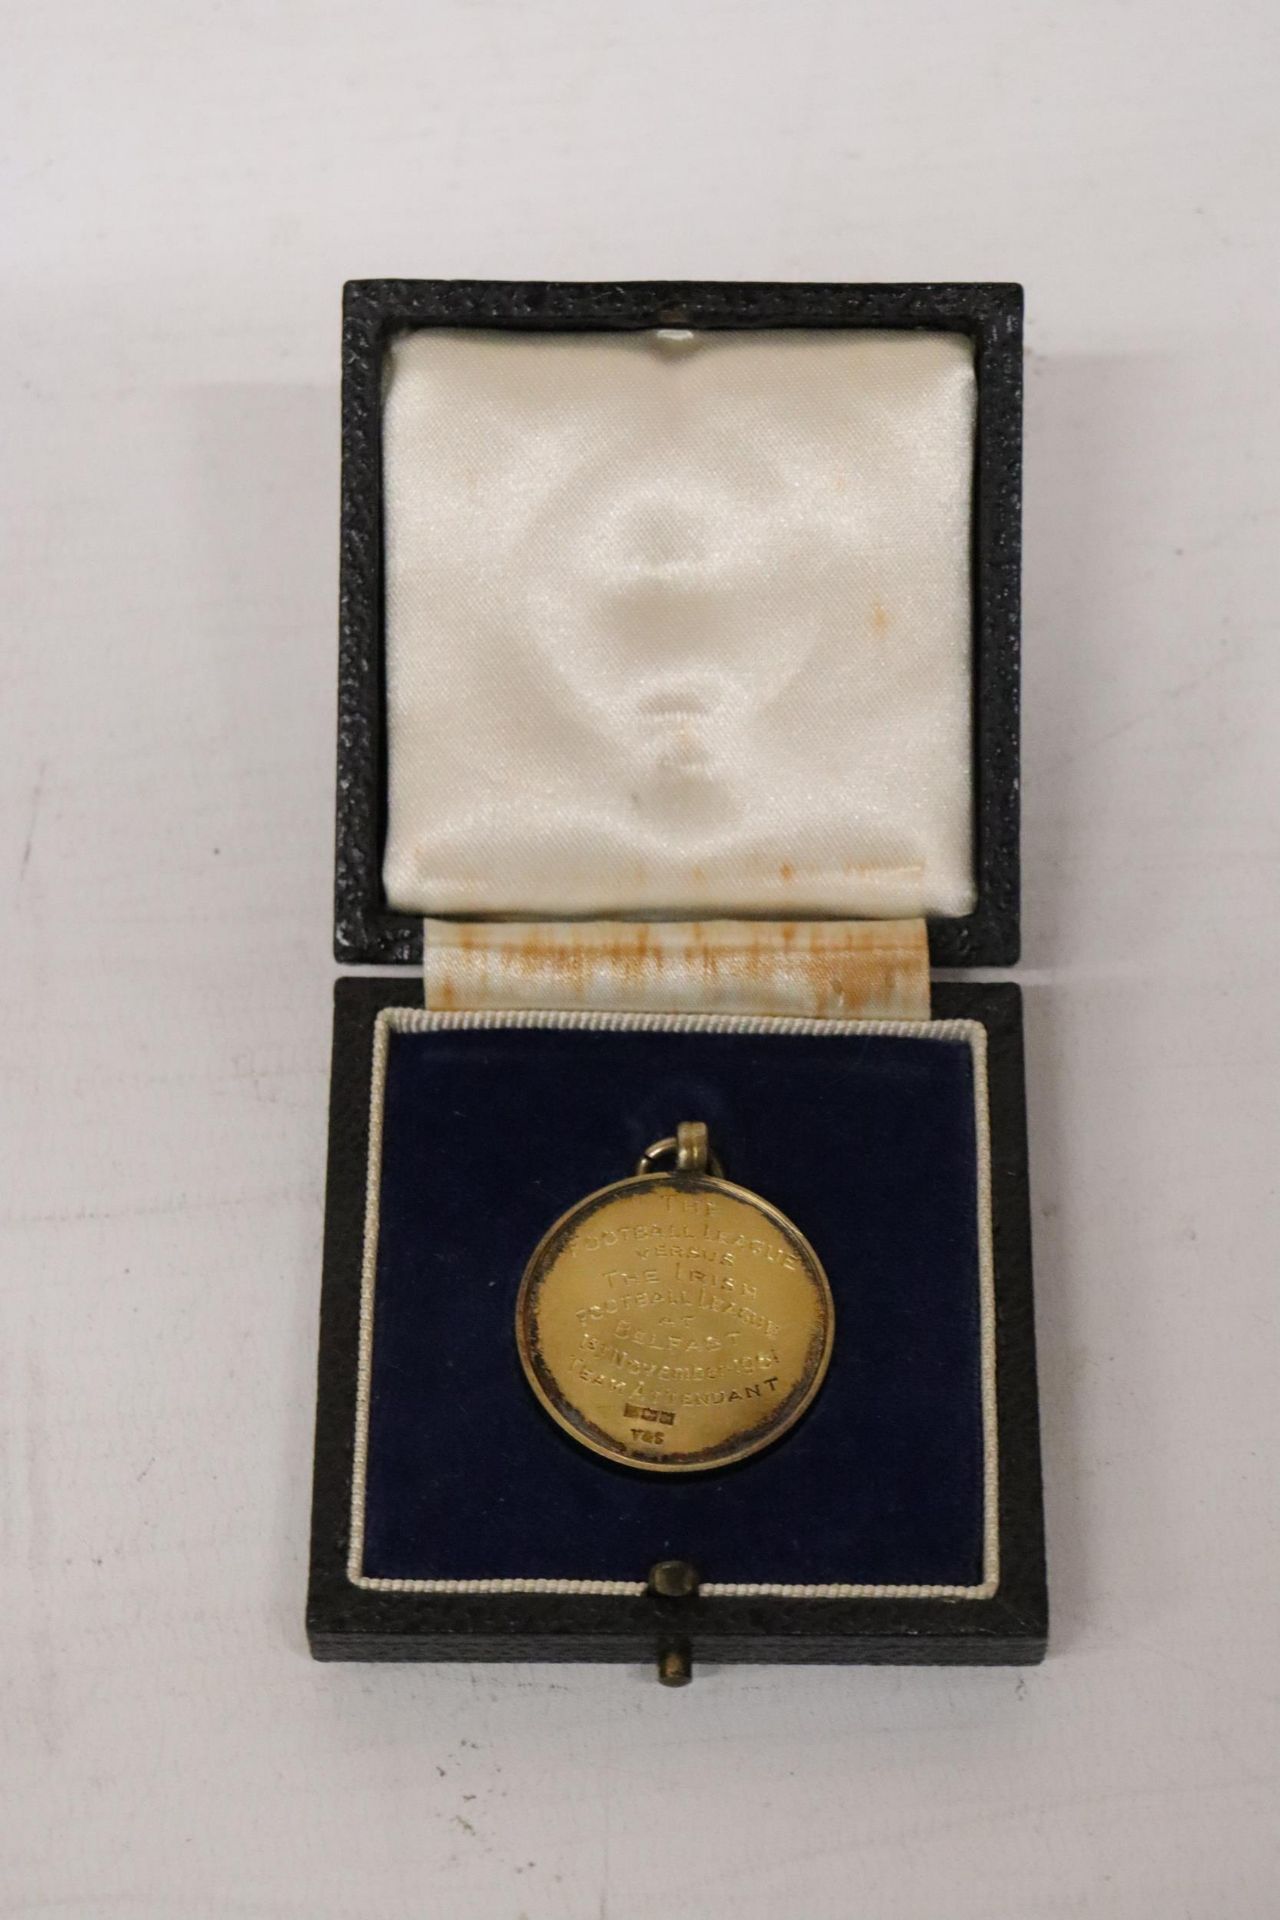 A BIRMINGHAM HALLMARKED SILVER 'THE FOOTBALL LEAGUE REPRESENTITIVE MATCH' MEDAL PRESENTED TO A - Image 2 of 5